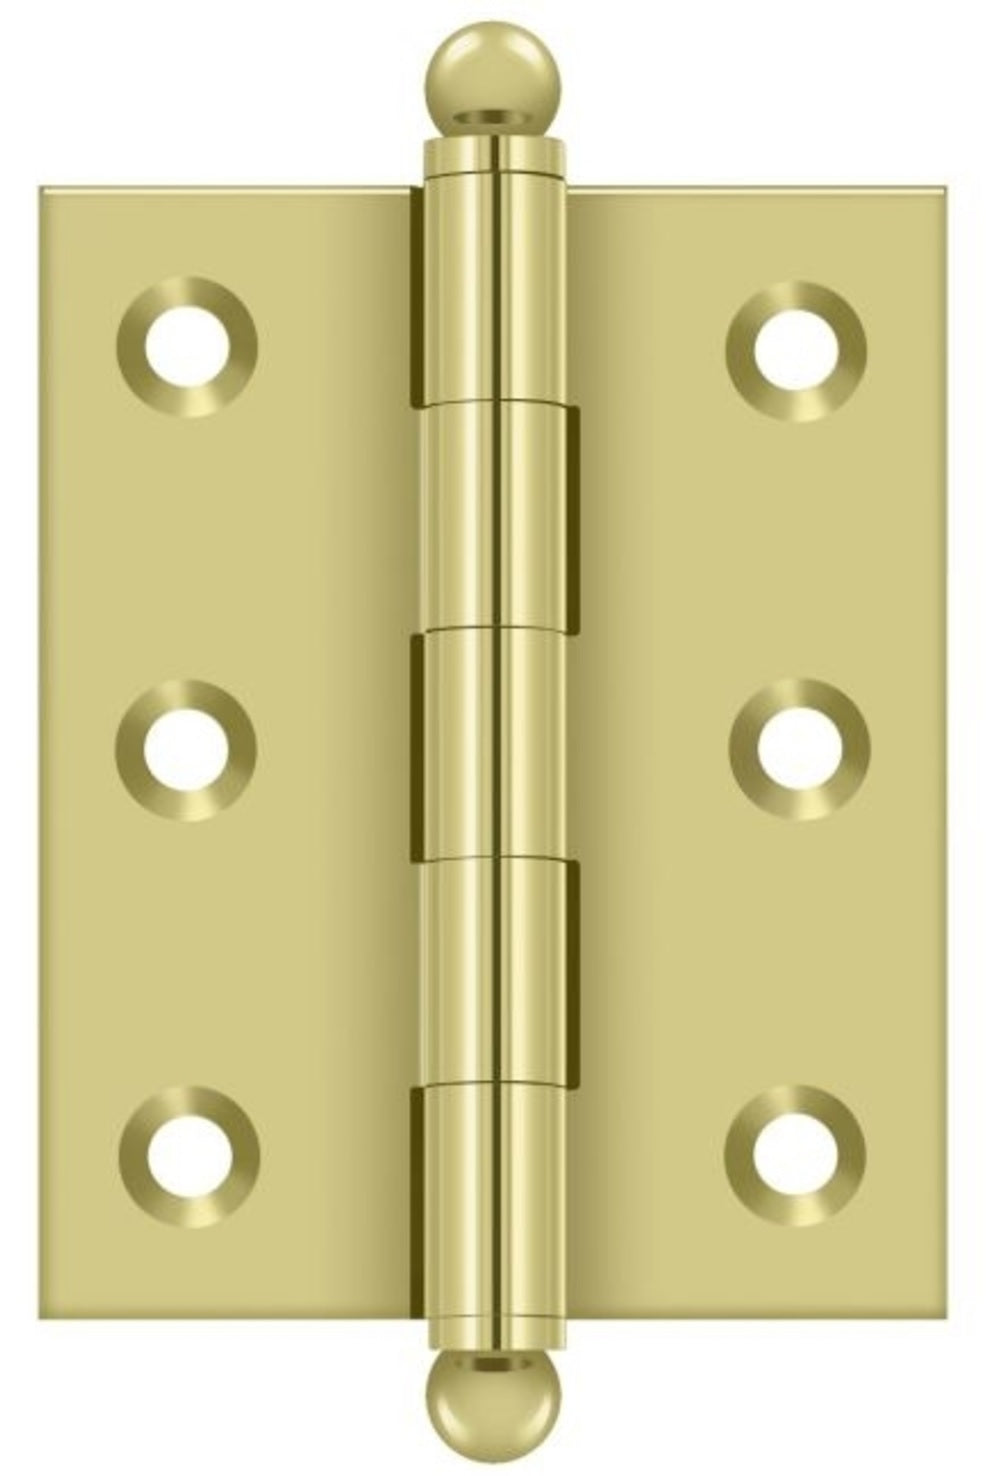 Deltana CH2520U3 Cabinet Hinge With Ball Tips, Bright Brass